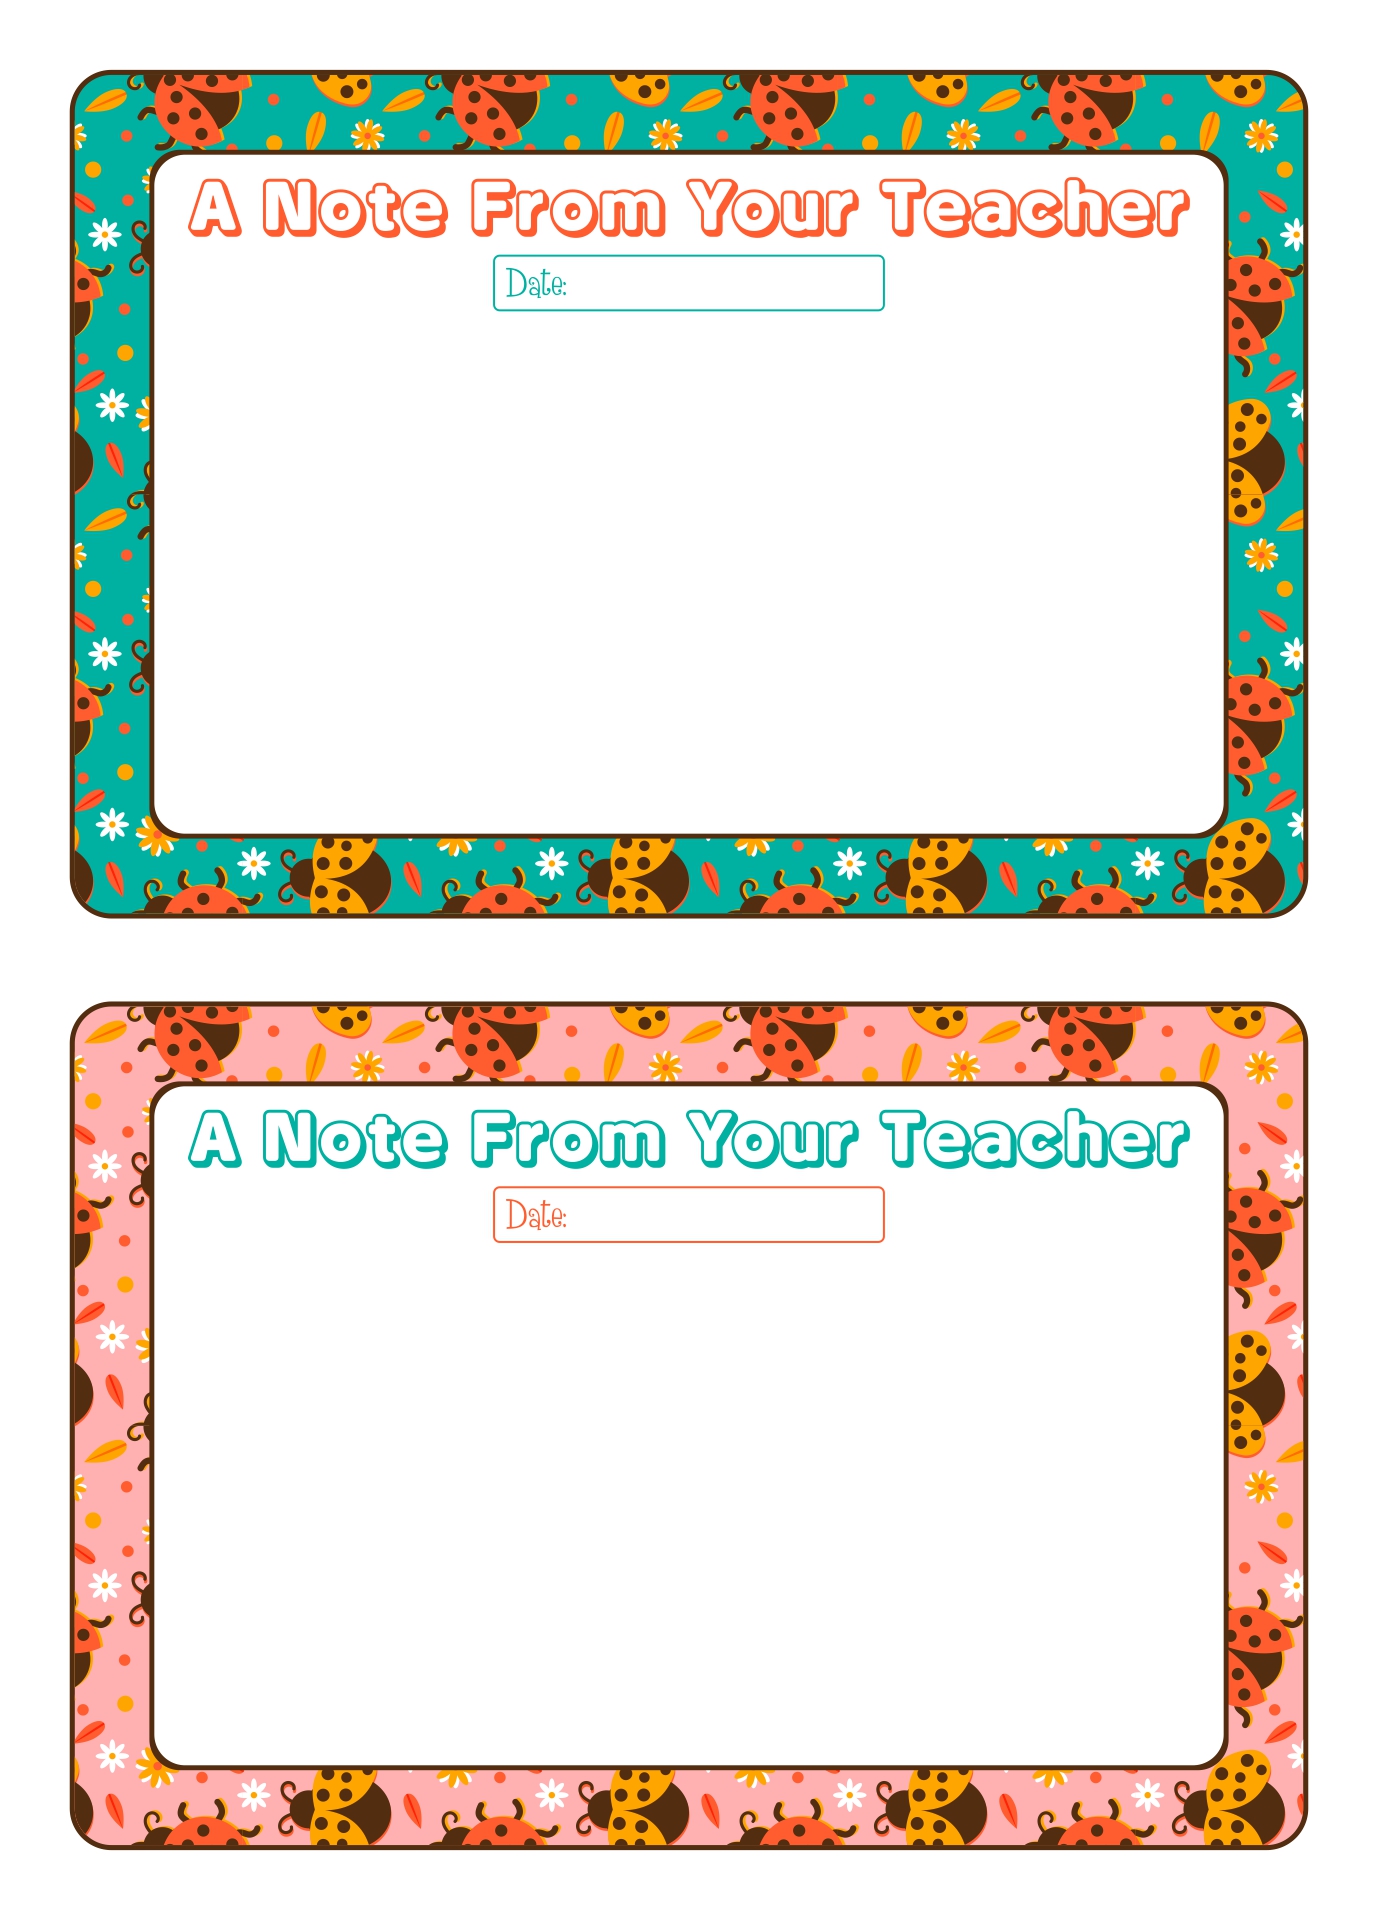 A Note From Your Teacher Printable